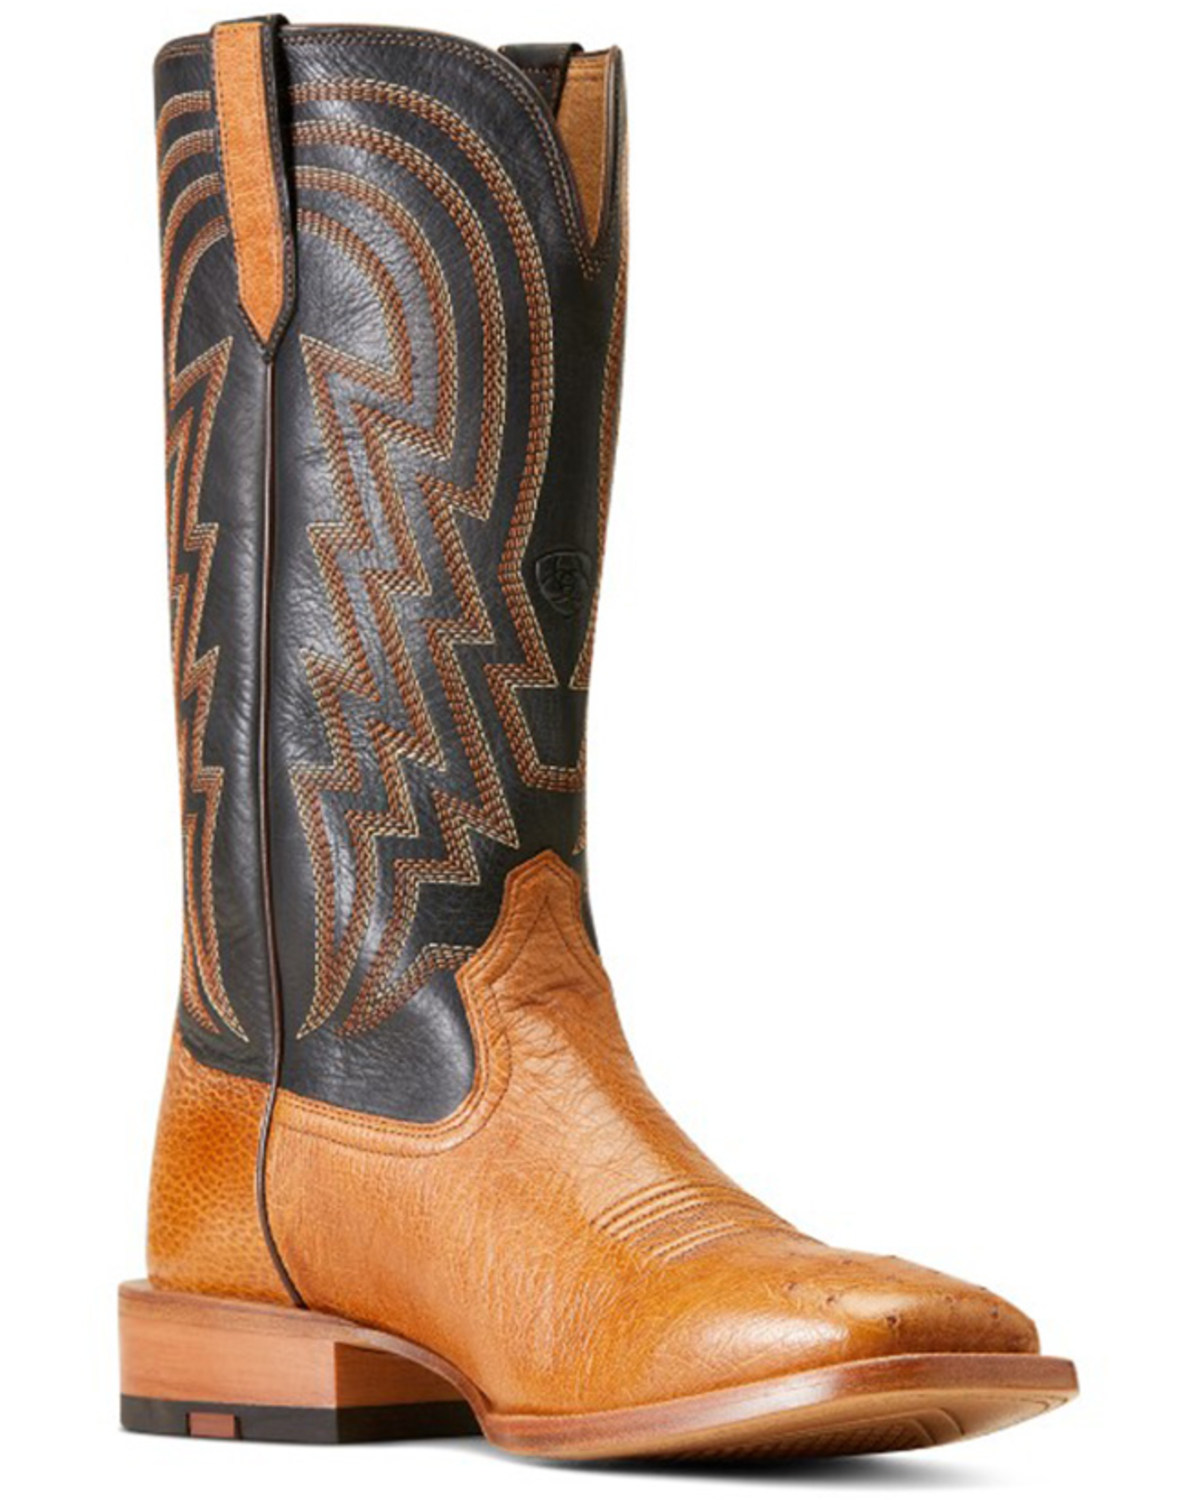 Ariat Men's Haywire Exotic Ostrich Western Boots - Broad Square Toe